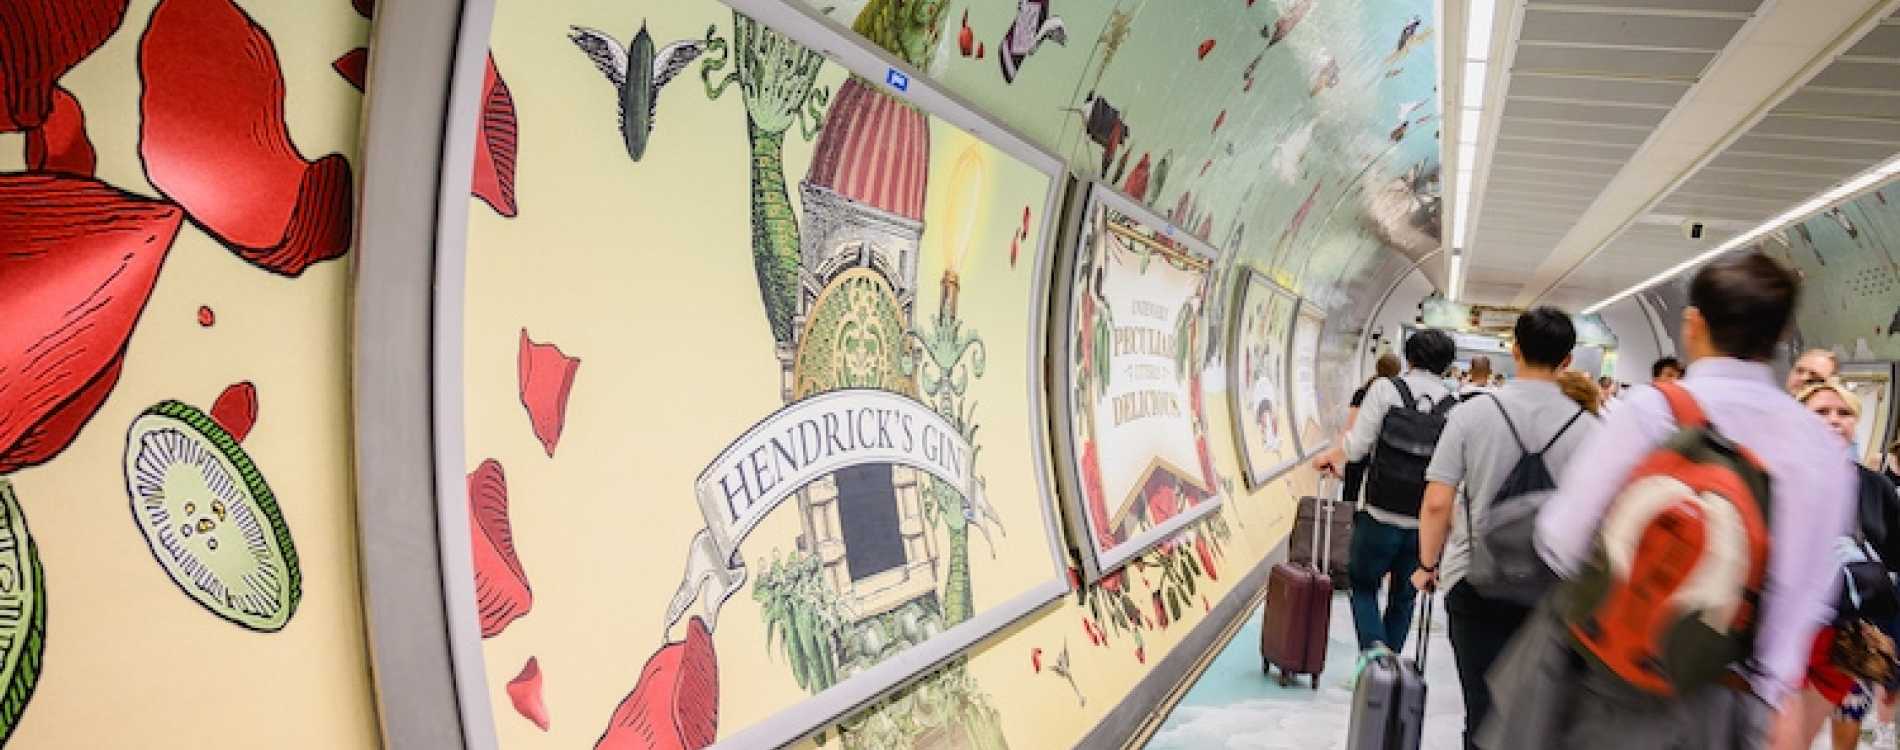 Hendricks Gin Creates An Immersive Scented Tunnel Wrap In Kings Cross Station 04